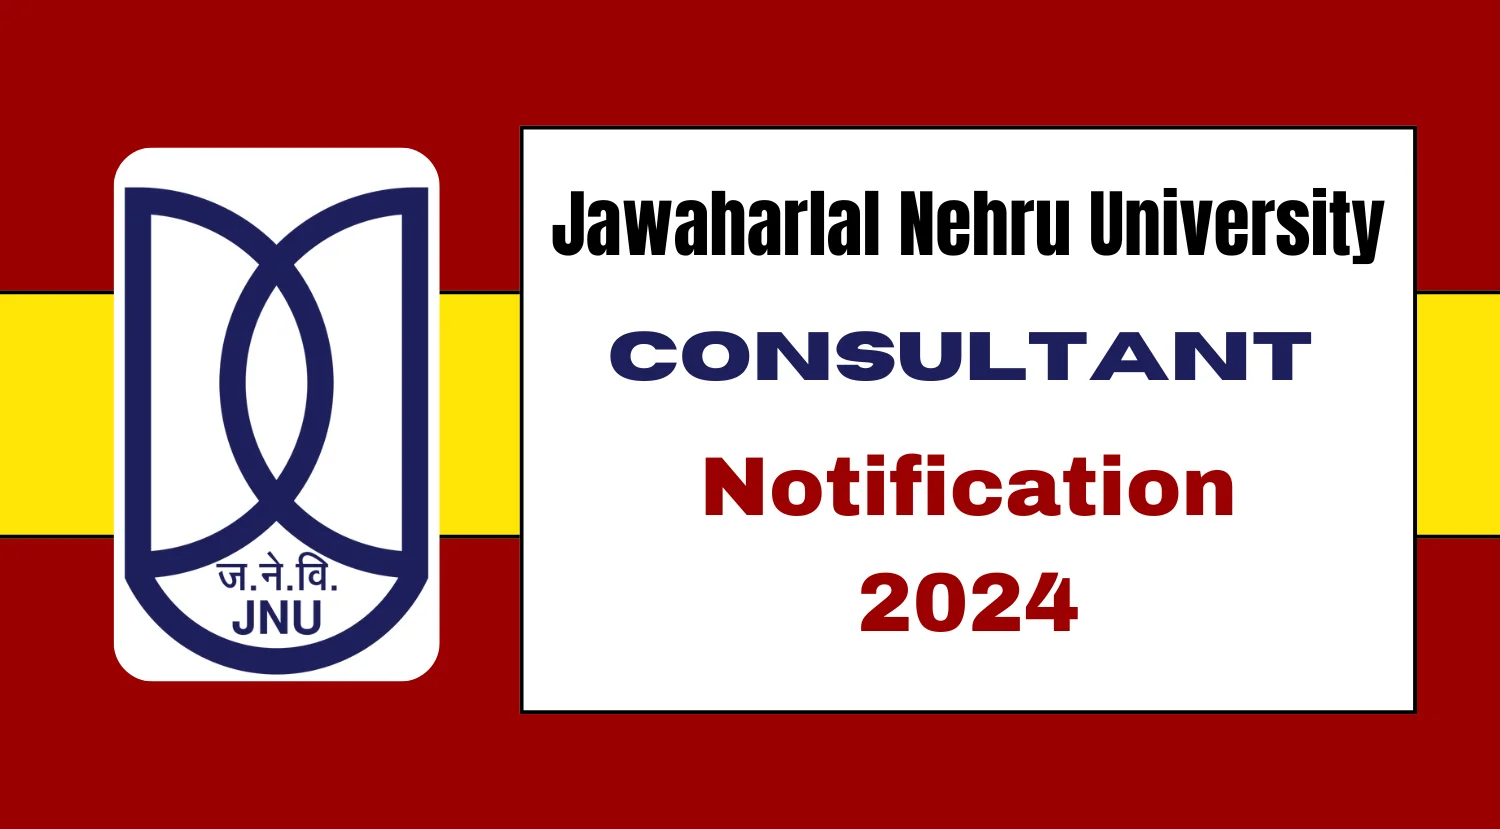 JNU Recruitment 2024 Notification for Consultant Positions